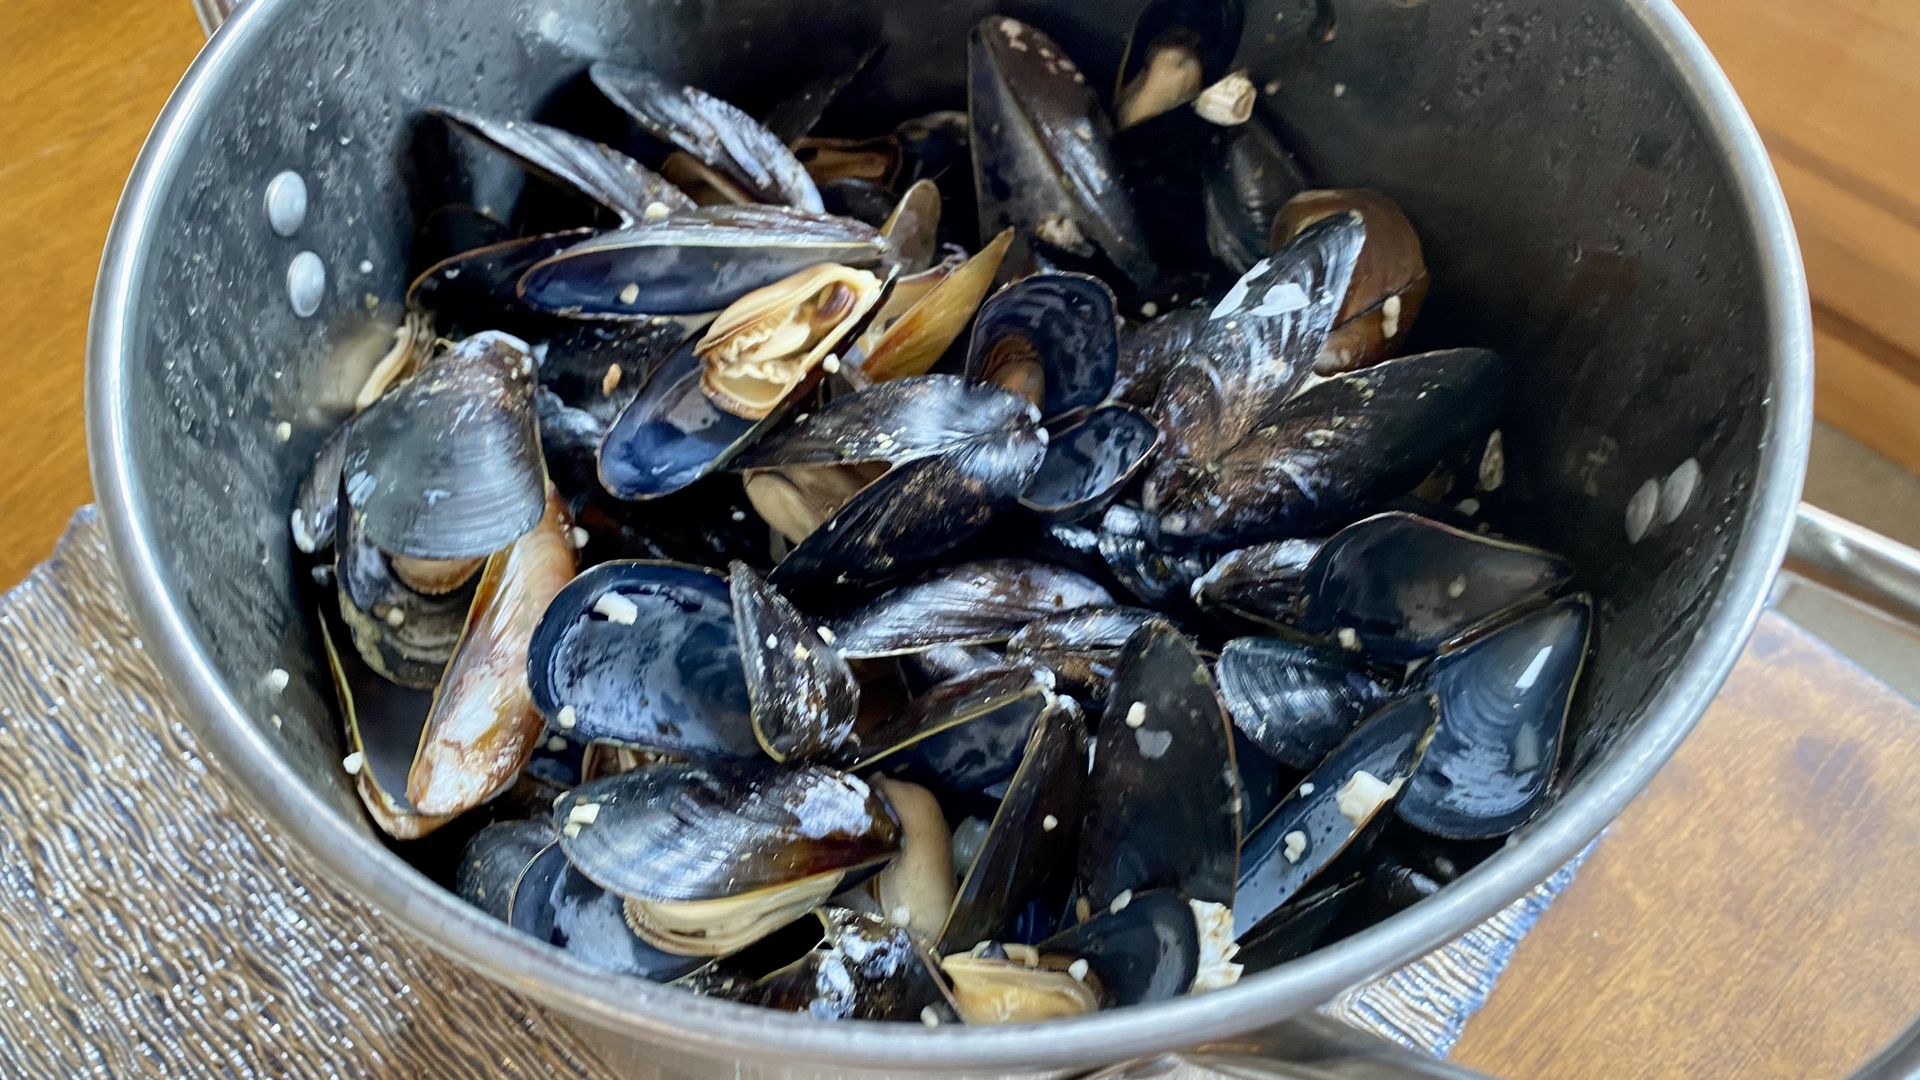 A stainless steel pot filled with steamed mussels on a wooden table.